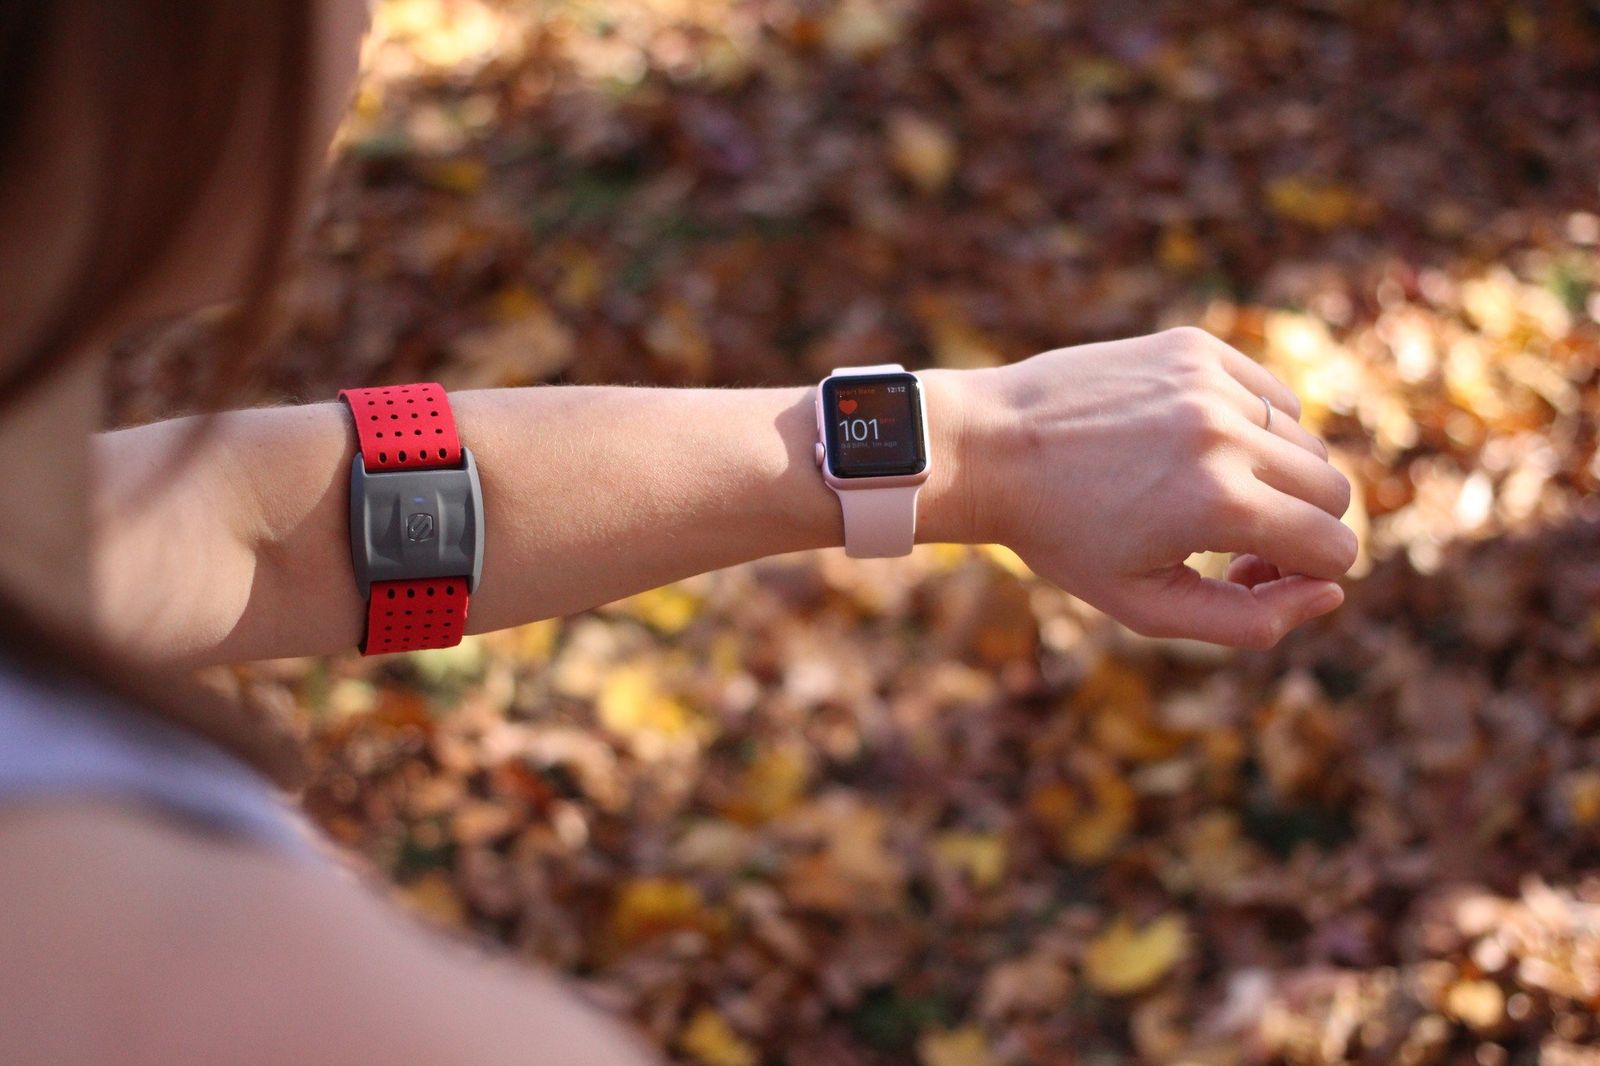 Turn The iPhone 4 Into A Heart Rate Monitor, For Free [New App]